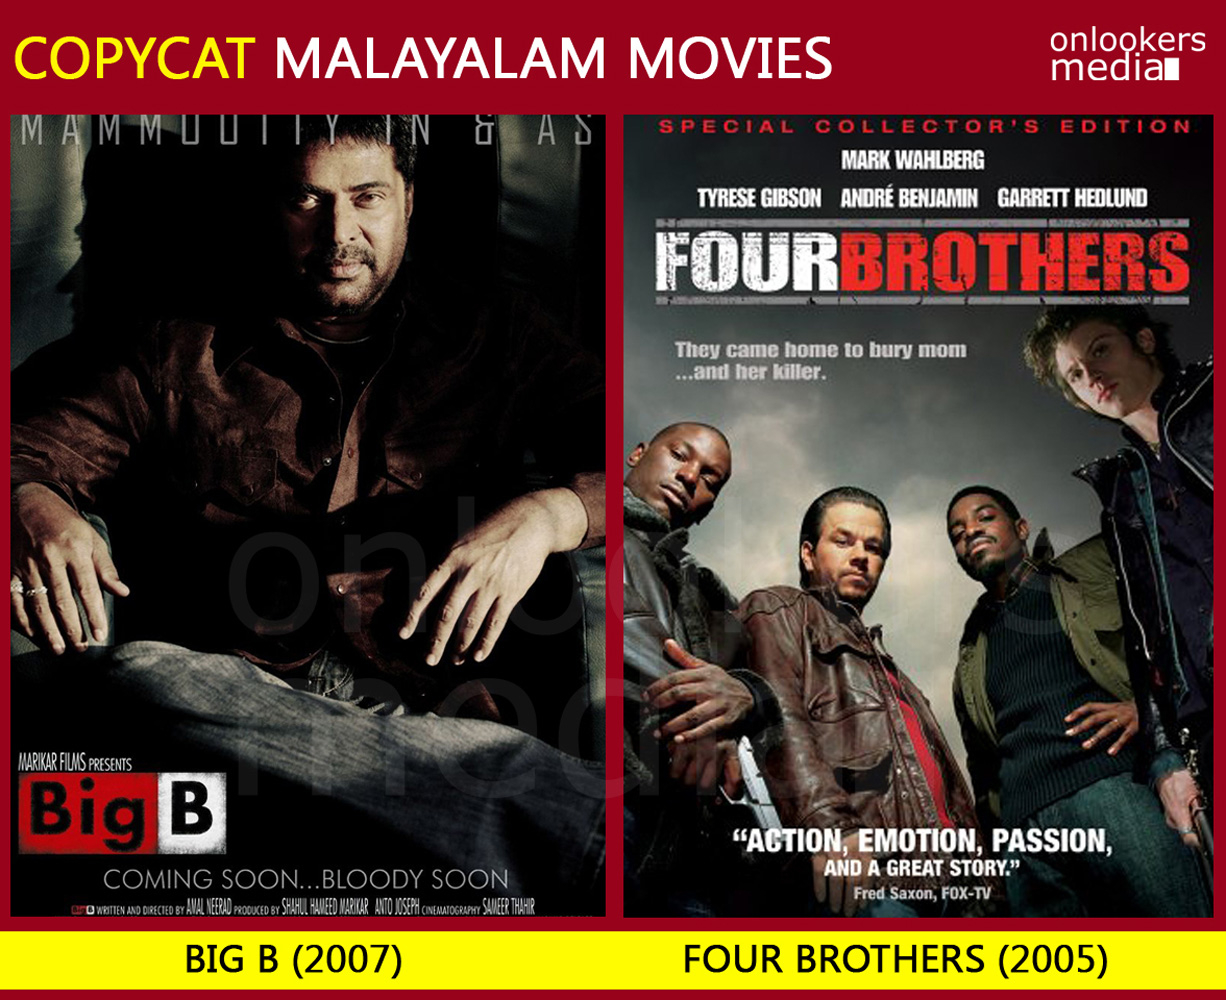 Big B malayalam movie copied from Four Brothers